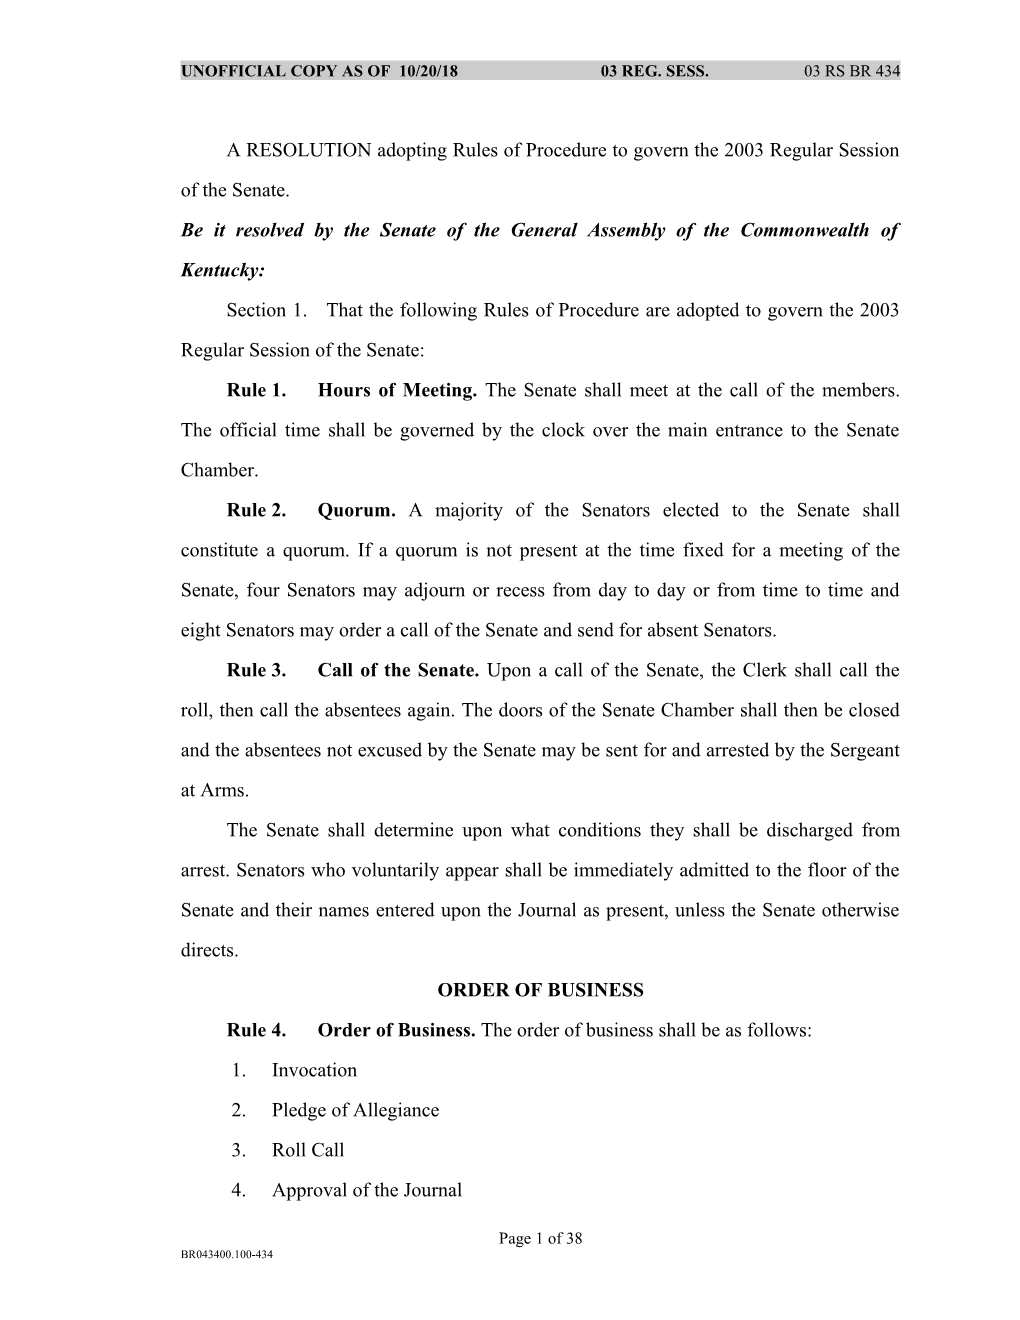 A RESOLUTION Adopting Rules of Procedure to Govern the 2003 Regular Session of the Senate